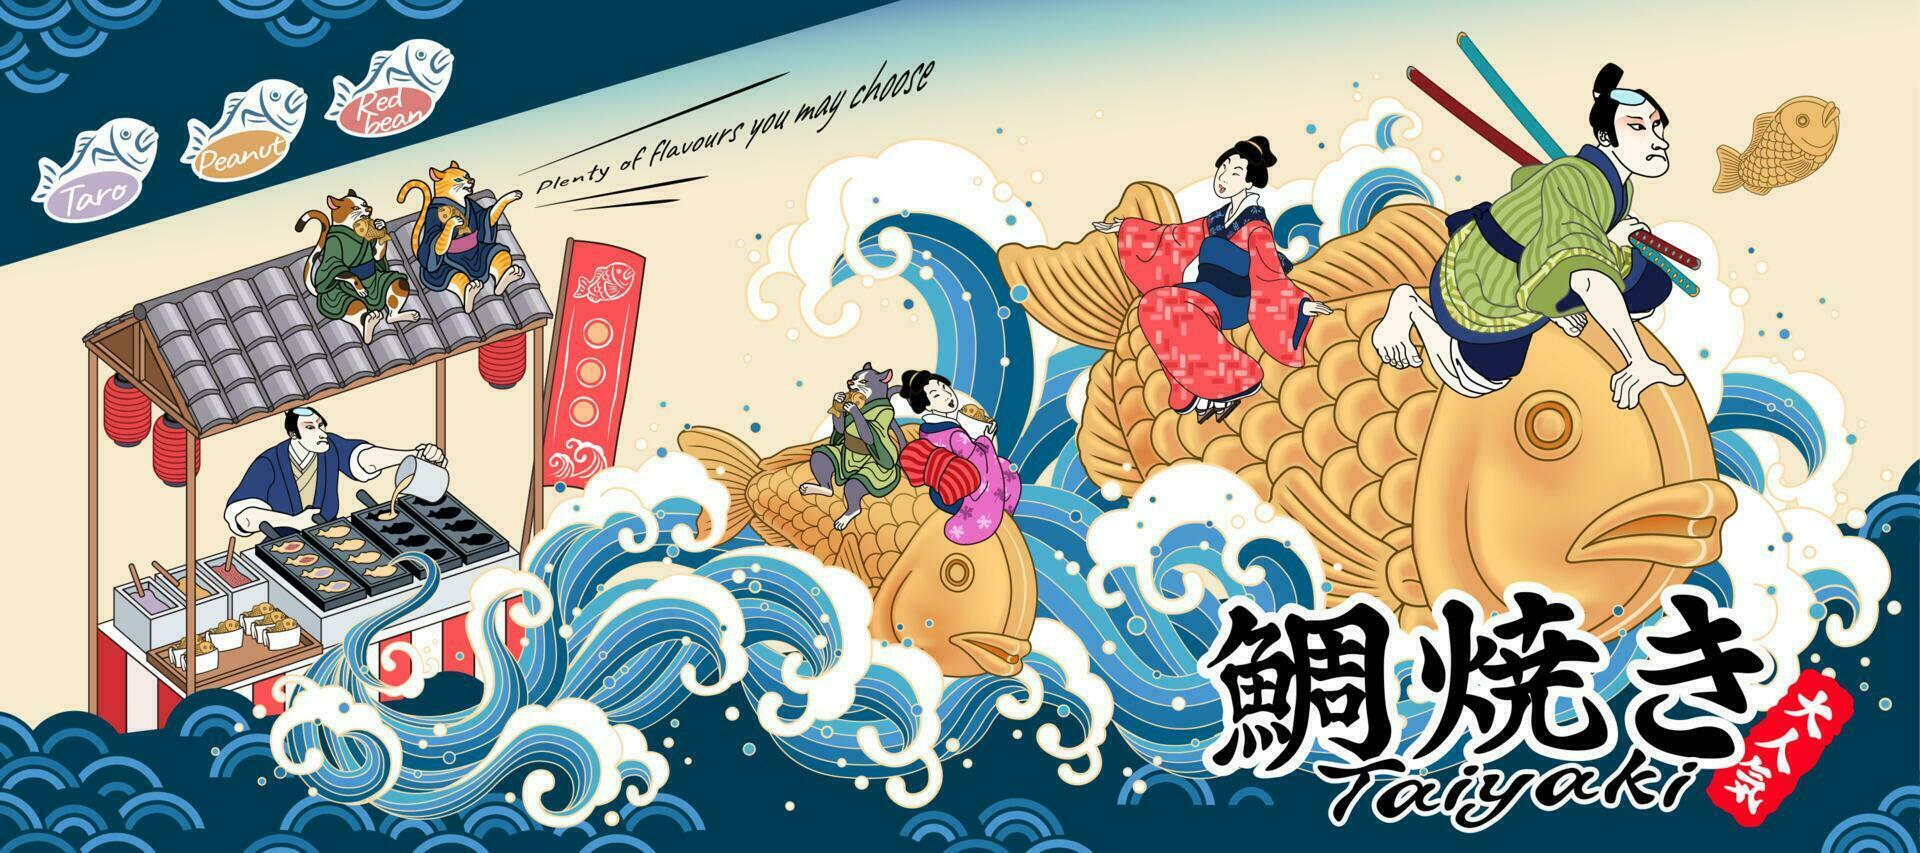 Taiyaki snack banner ads with ukiyo-e style people riding on taiyaki fish flying up from street vendor, fish-shaped cake and very popular written in Japanese texts vector